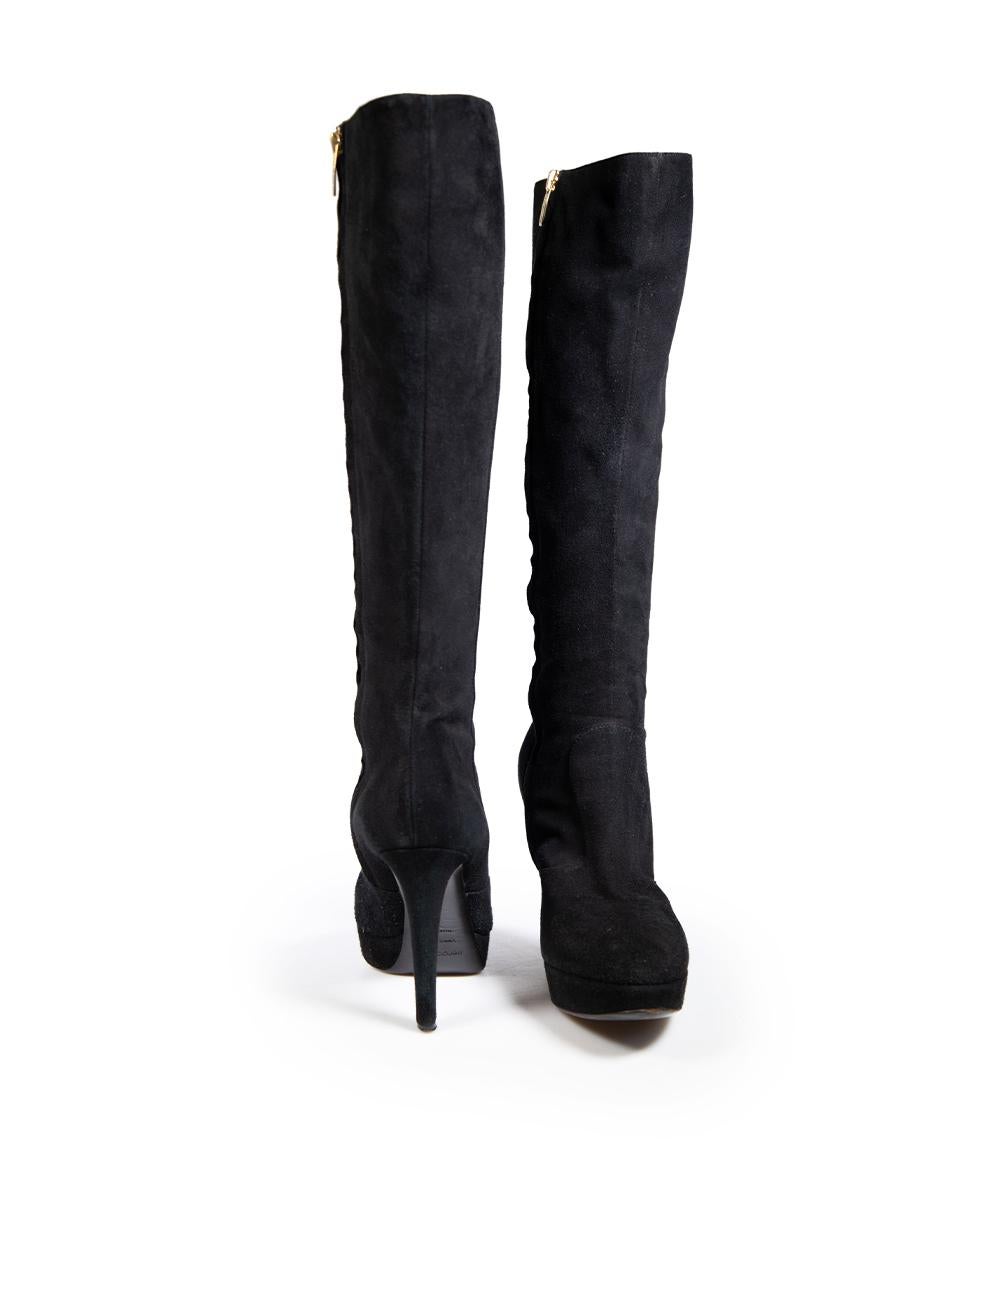 Sergio Rossi Black Suede Knee High Heeled Boots Size IT 38 In Good Condition For Sale In London, GB